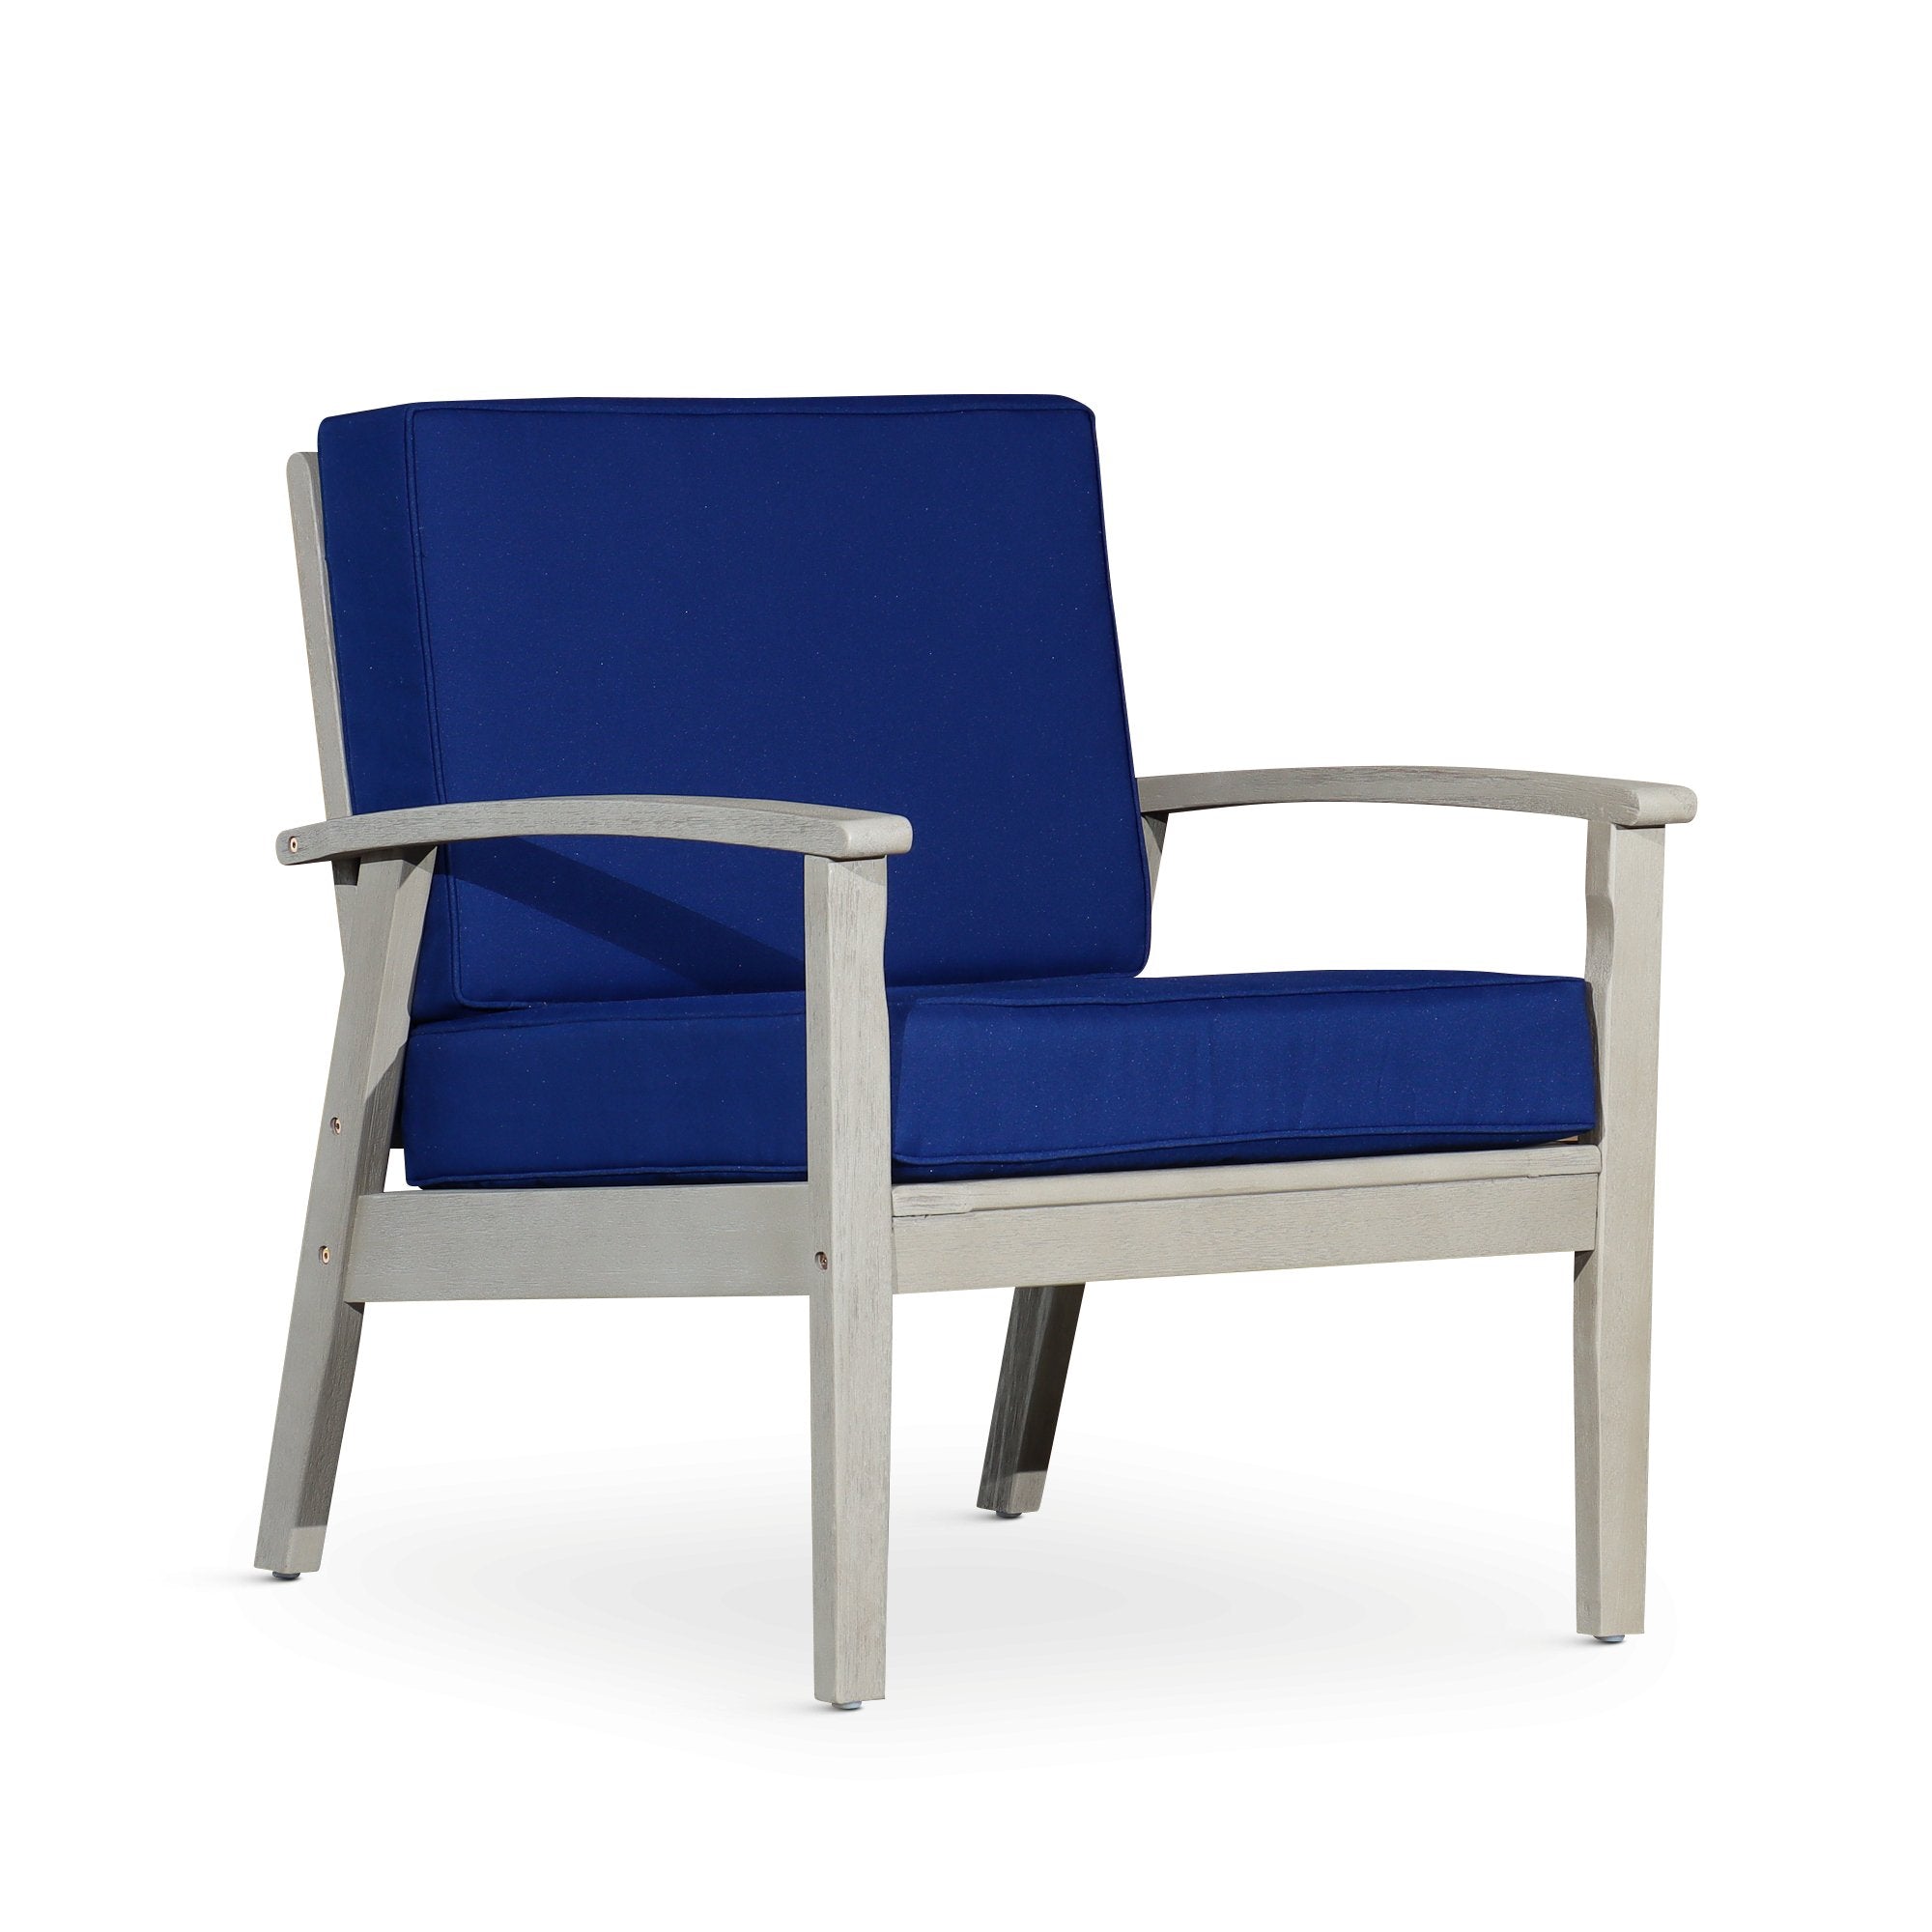 Deep-Seat-Outdoor-Chair,-Driftwood-Gray-Finish,-Navy-Cushions-Outdoor-Chairs